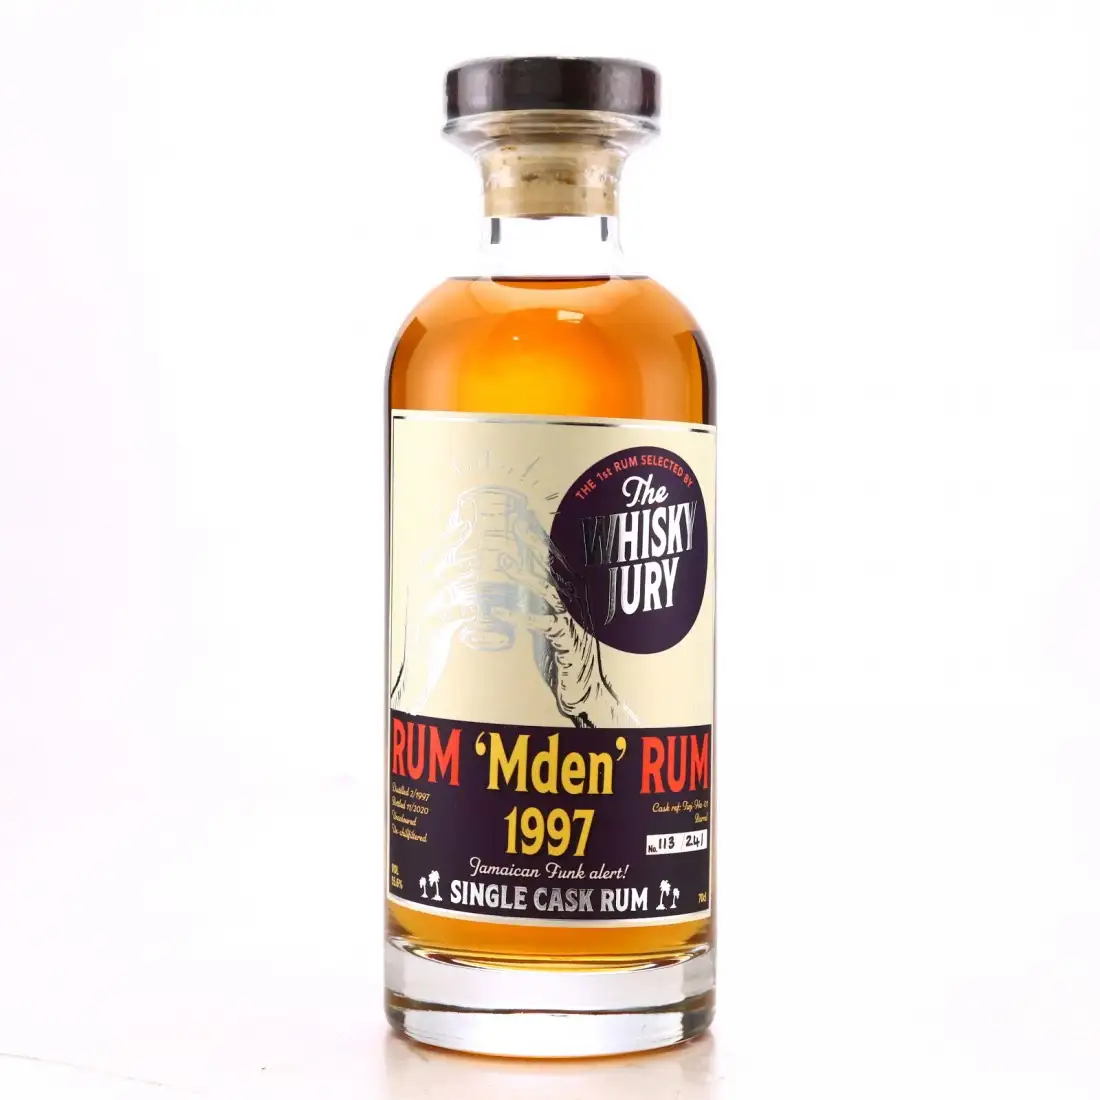 Image of the front of the bottle of the rum Mden C<>H